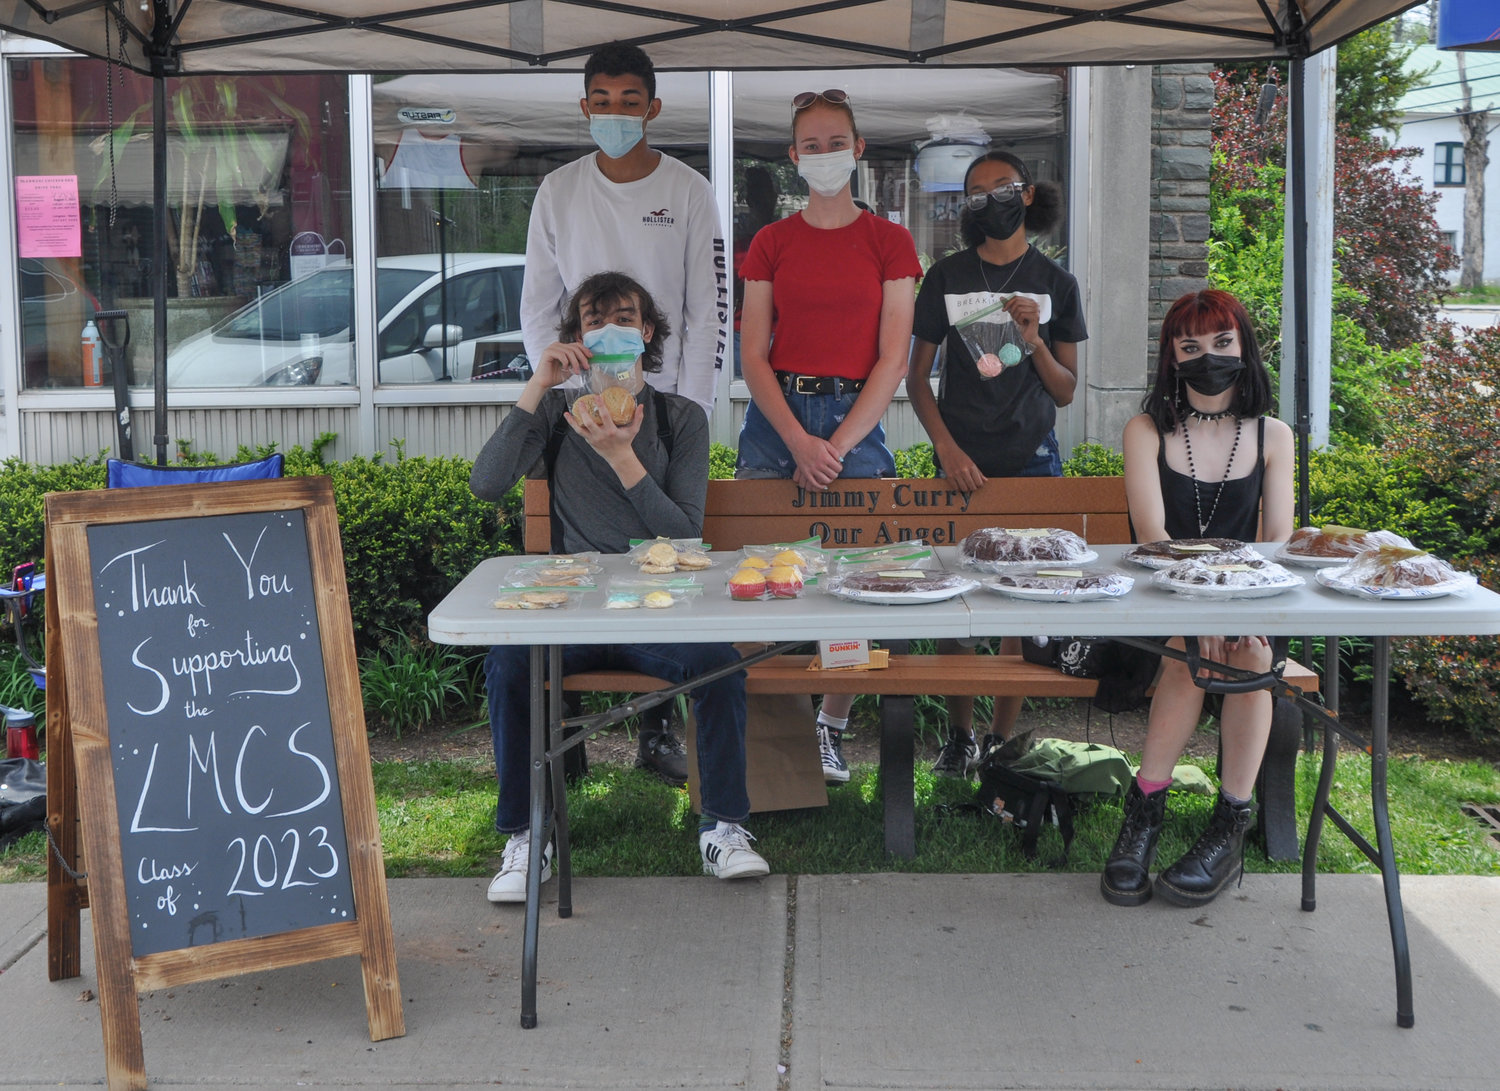 The Livingston Manor Flower Day sounded appealing, promising shops selling potted plants and flowers, not to mention a bake sale hosted by the Livingston Manor High School Class of 2023.